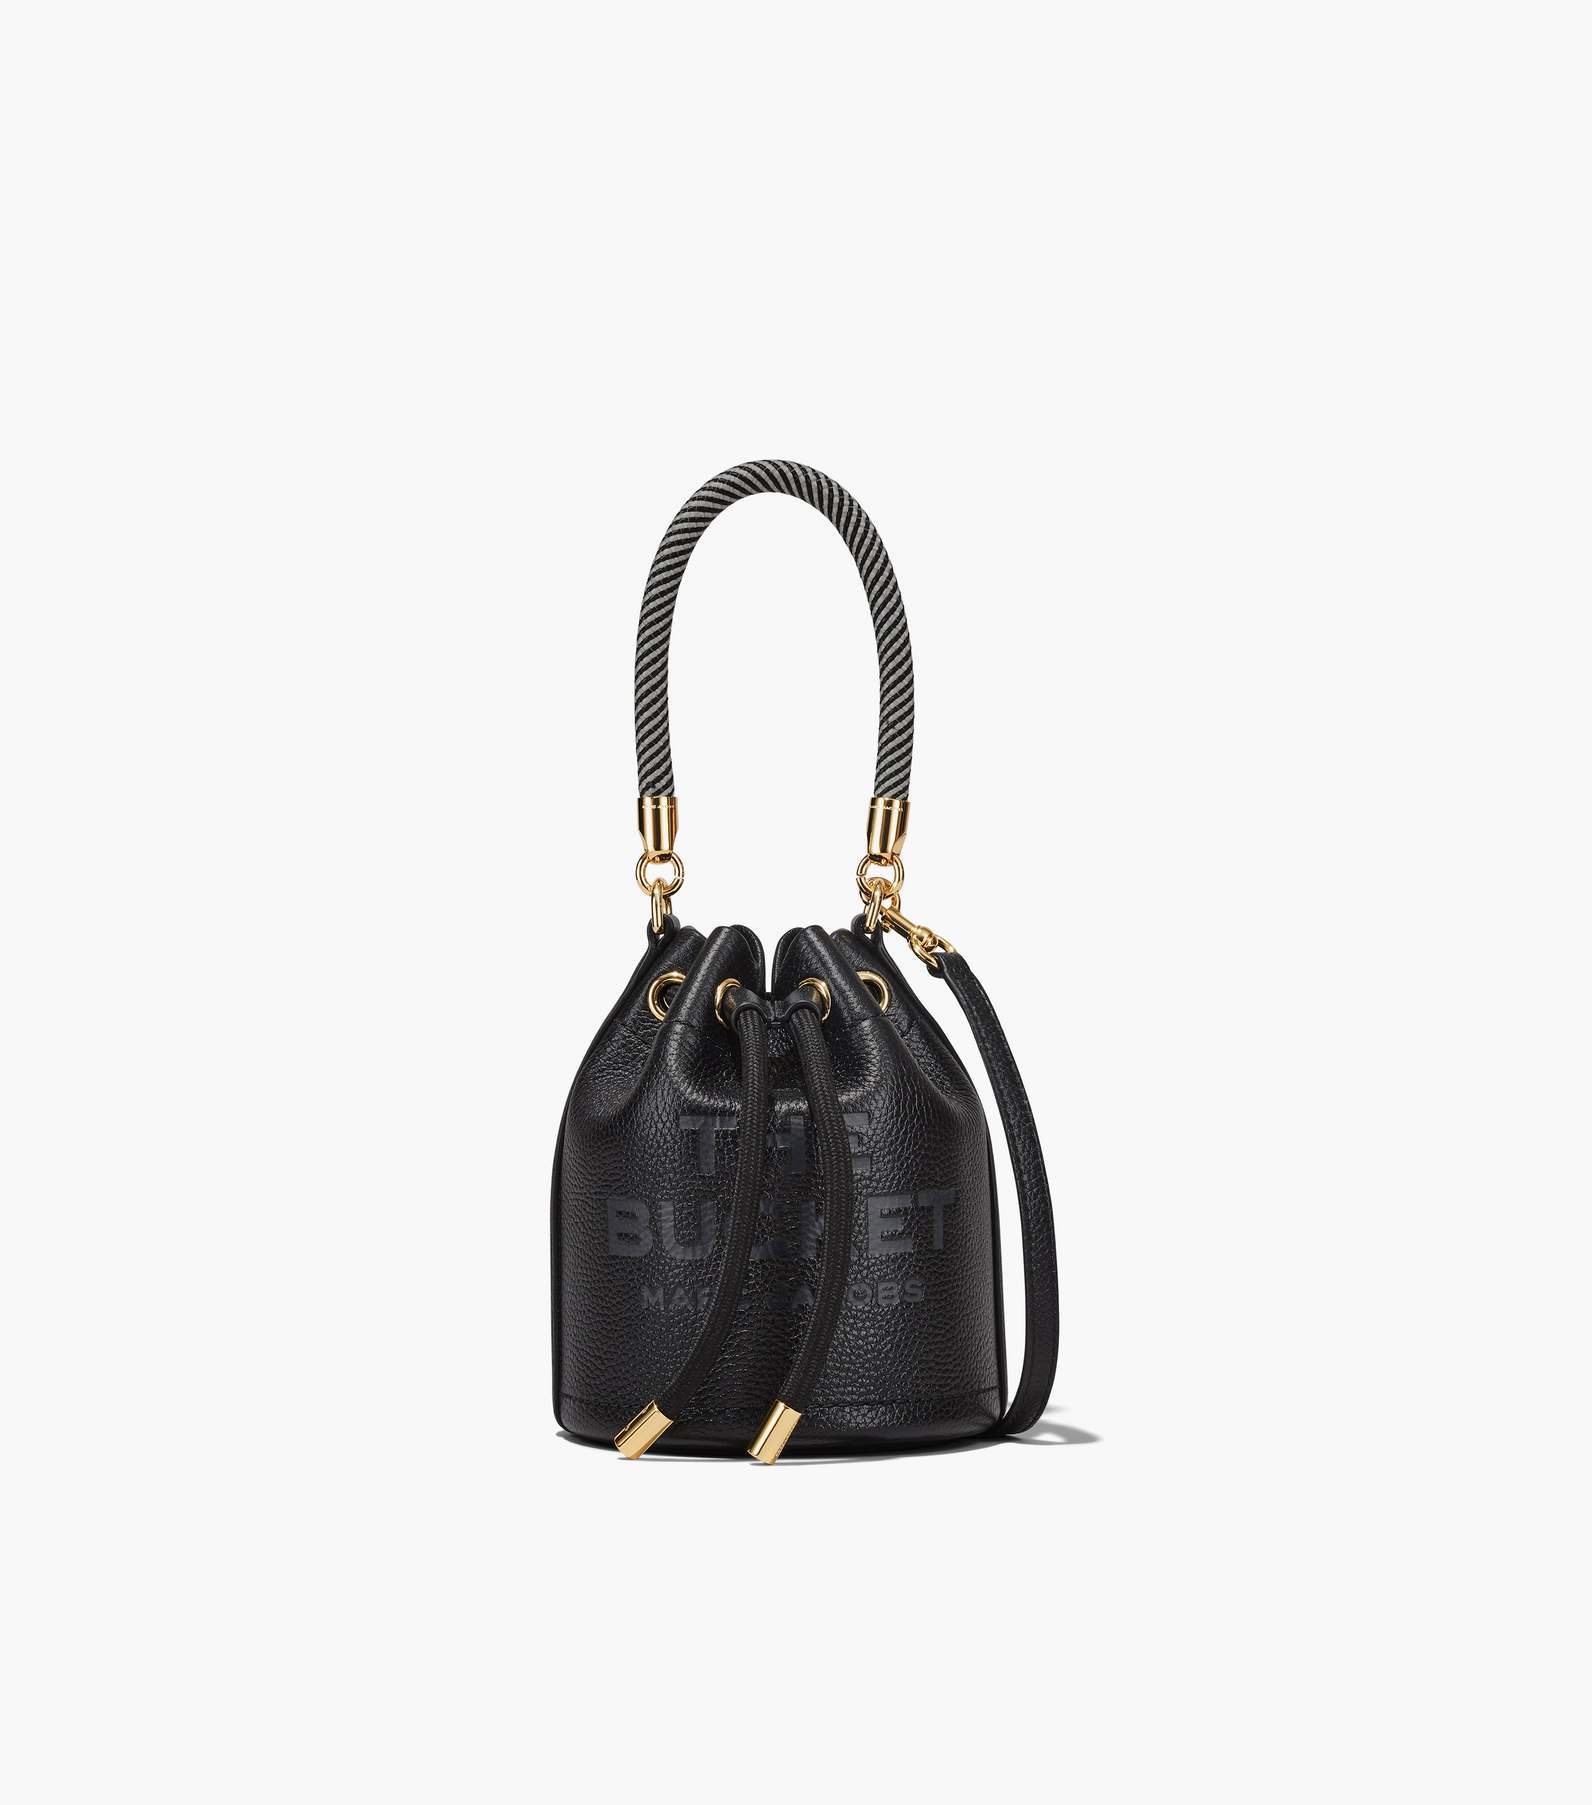 The Leather Micro Bucket Bag